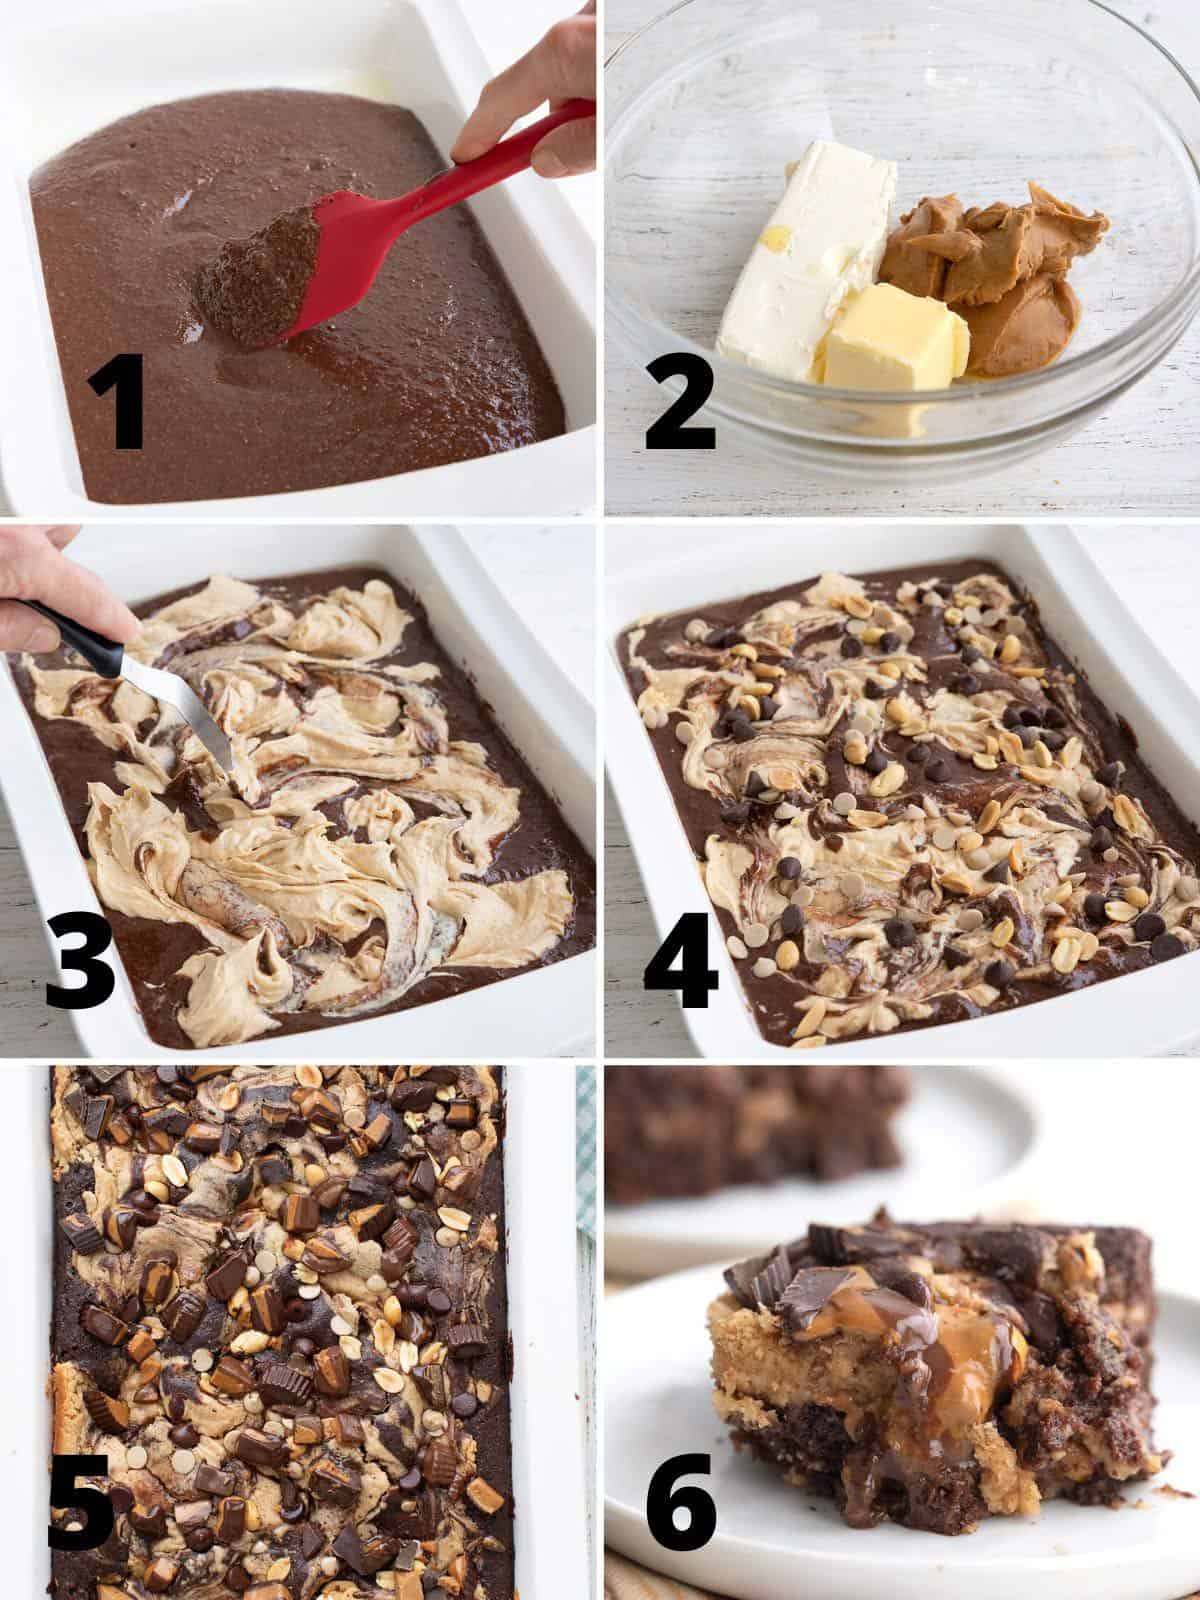 6 images showing the steps for making keto peanut butter earthquake cake.